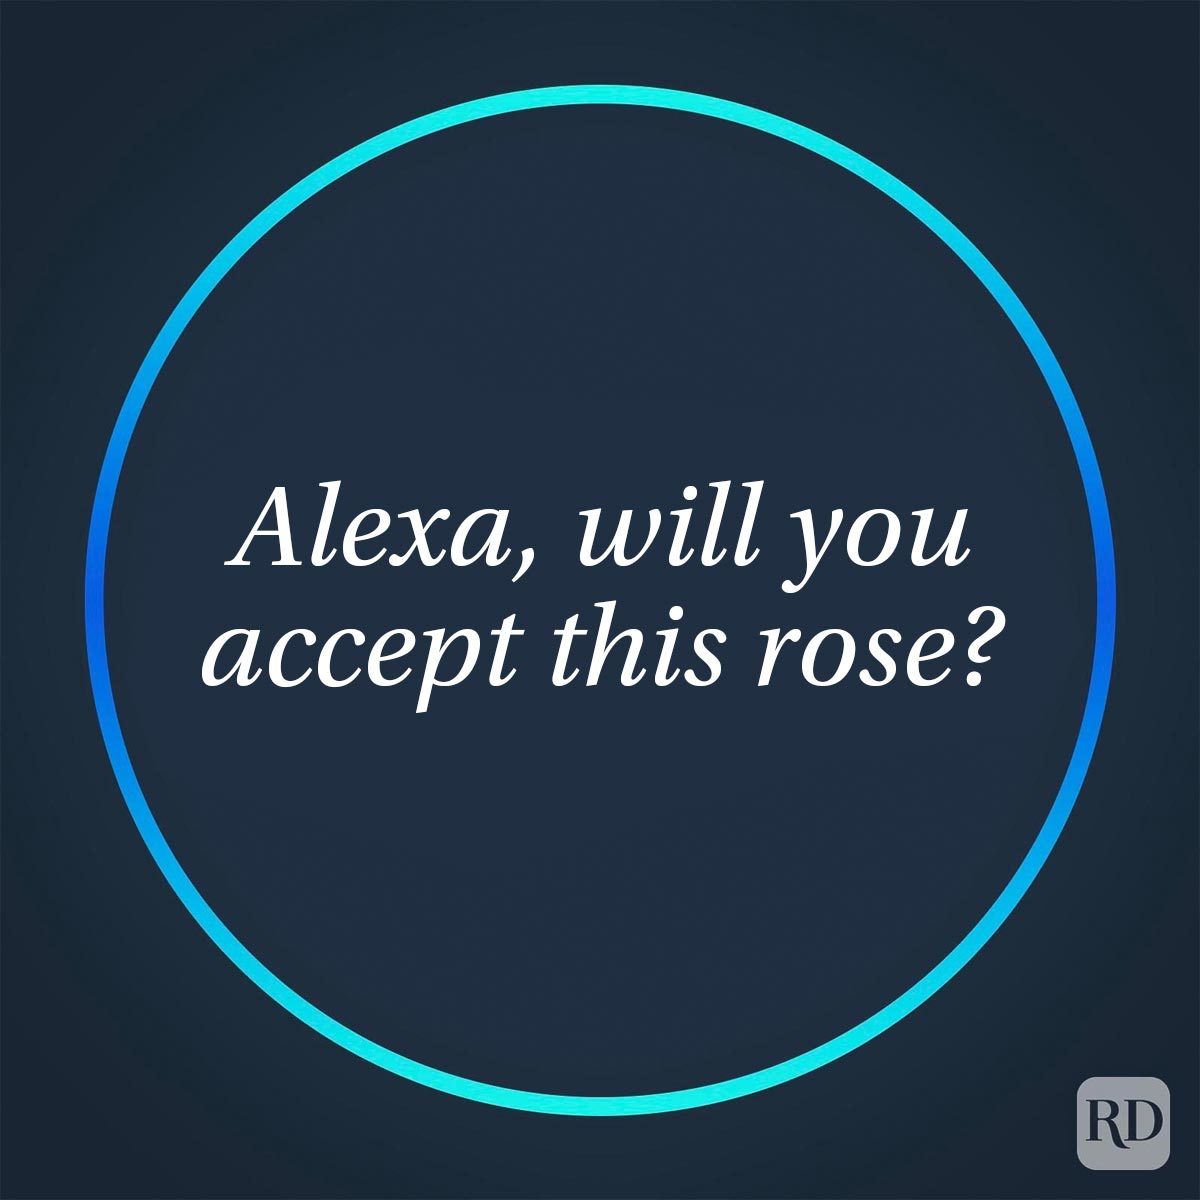 Funny Things To Ask Alexa For A Good Laugh glowing circle with an Alexa question in center